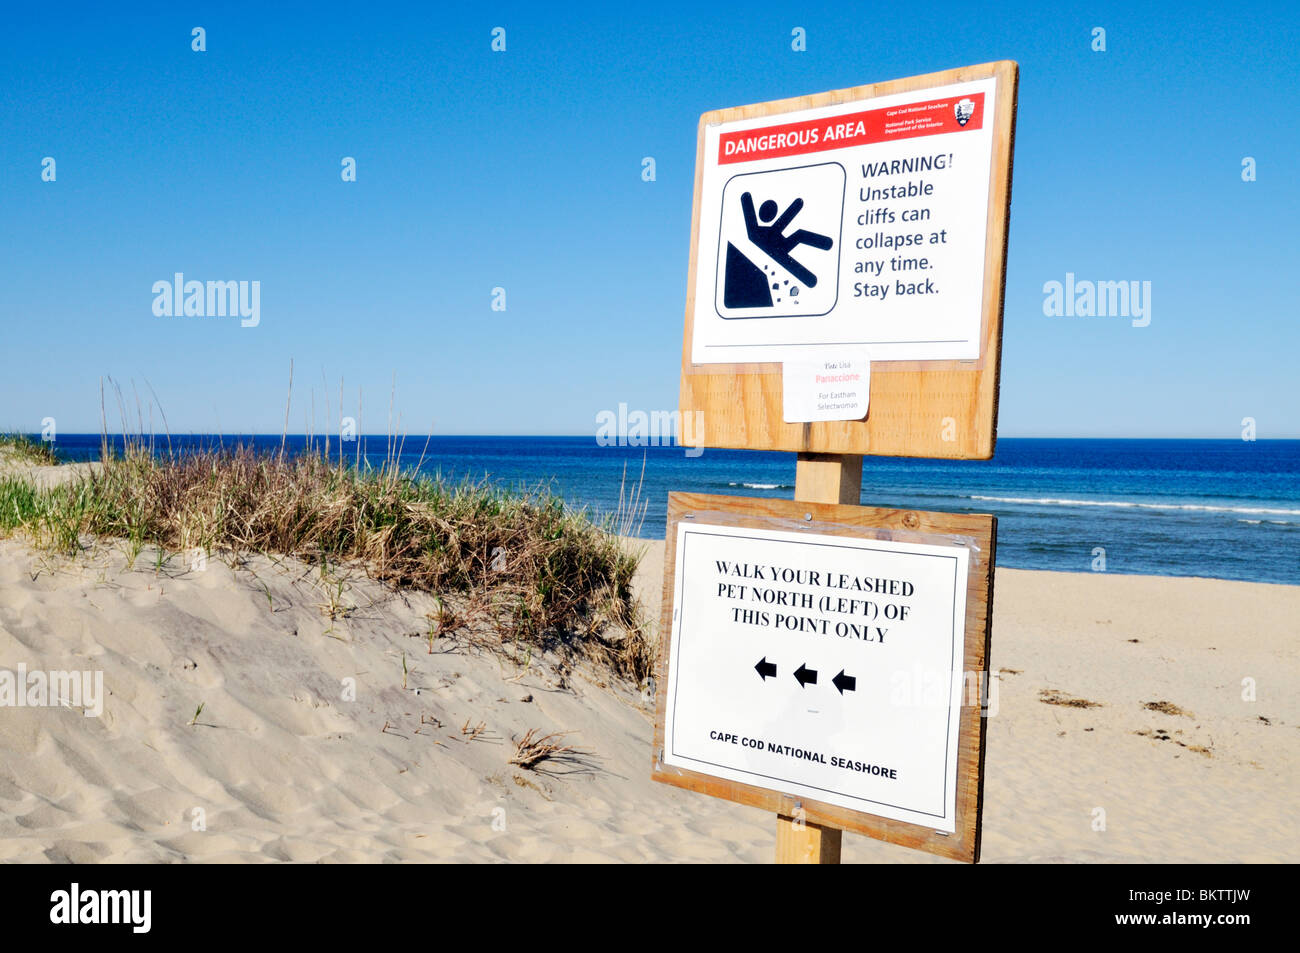 Warning sign for unstable cliffs at Coast Guard beach, Cape Cod National Seashore, Eastham, Massachusetts USA Stock Photo